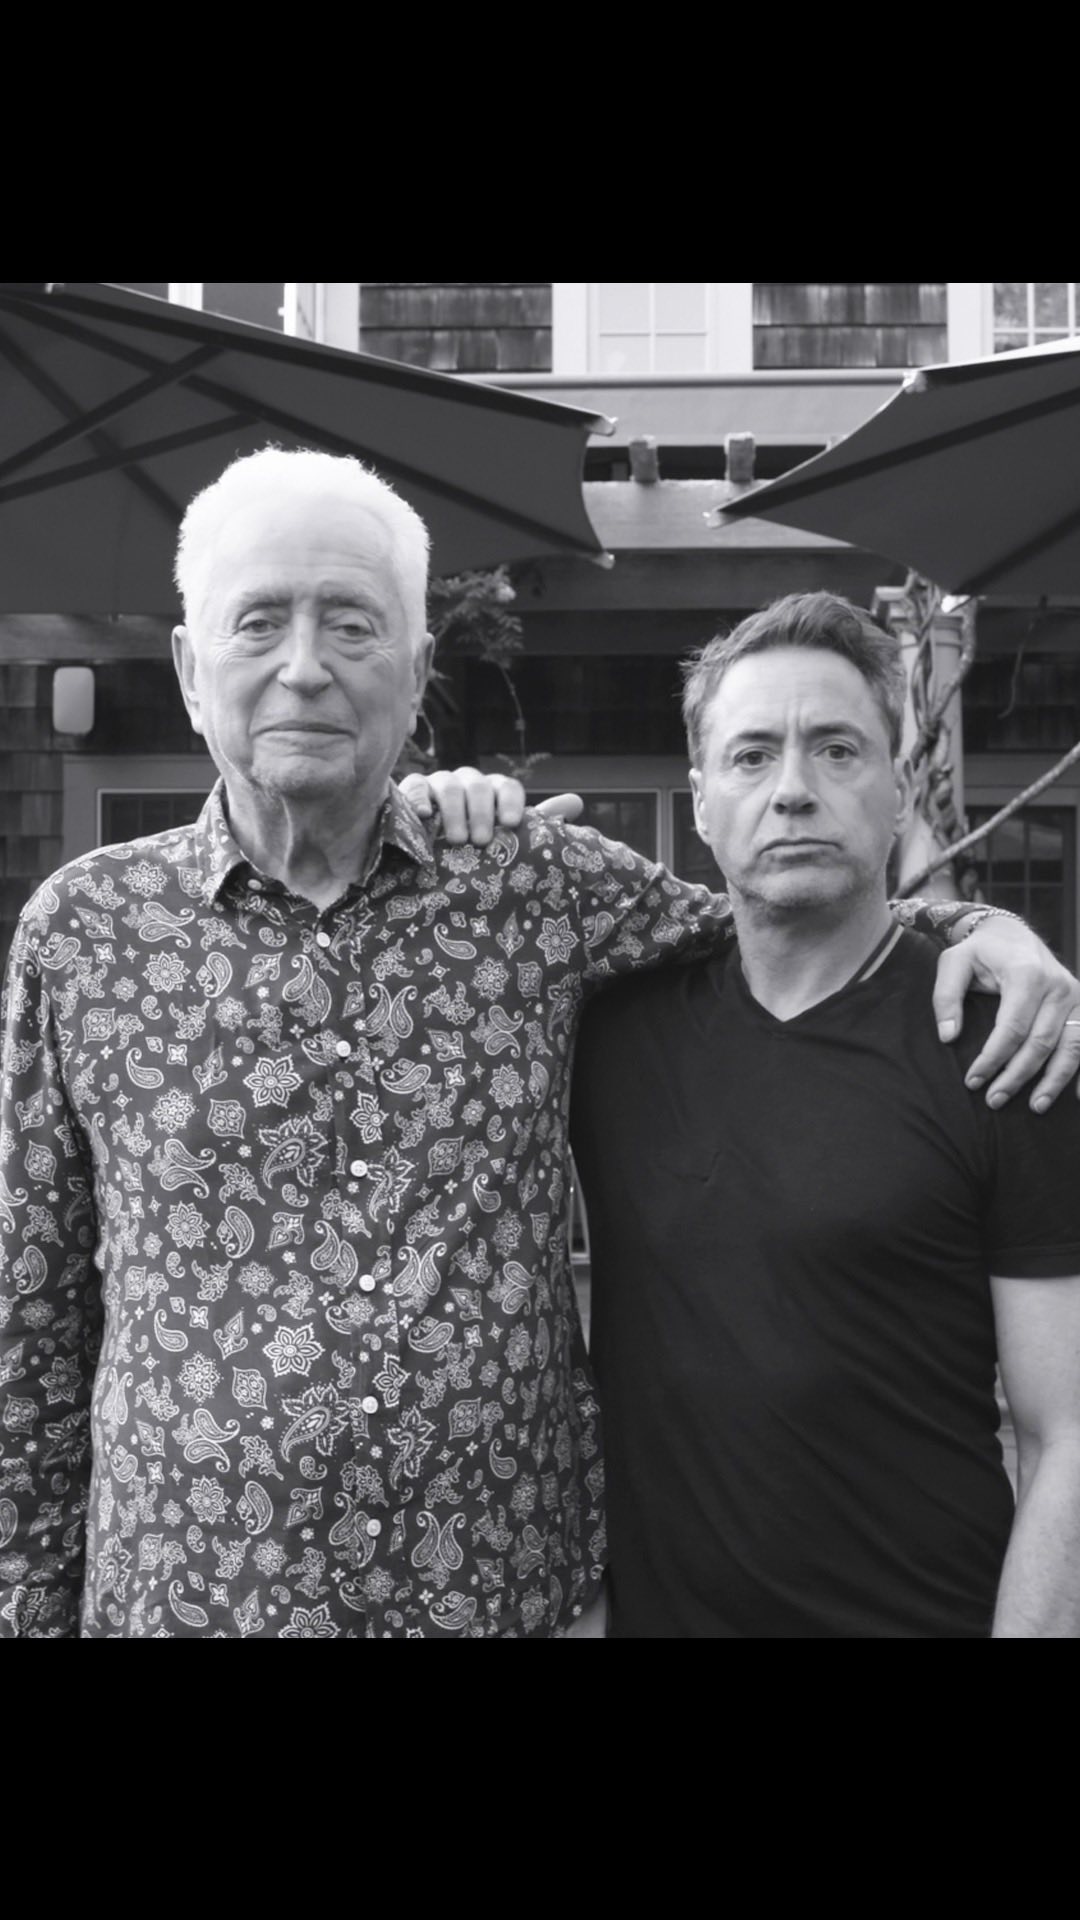 At once comedic and cathartic, “Sr.” is Robert Downey Jr.’s exploration of the life and loves of Hollywood filmmaker, Robert Downey. Official selection of the American Film Institute, “Sr.” is a film by Chris Smith. Only on Netflix, December 2.